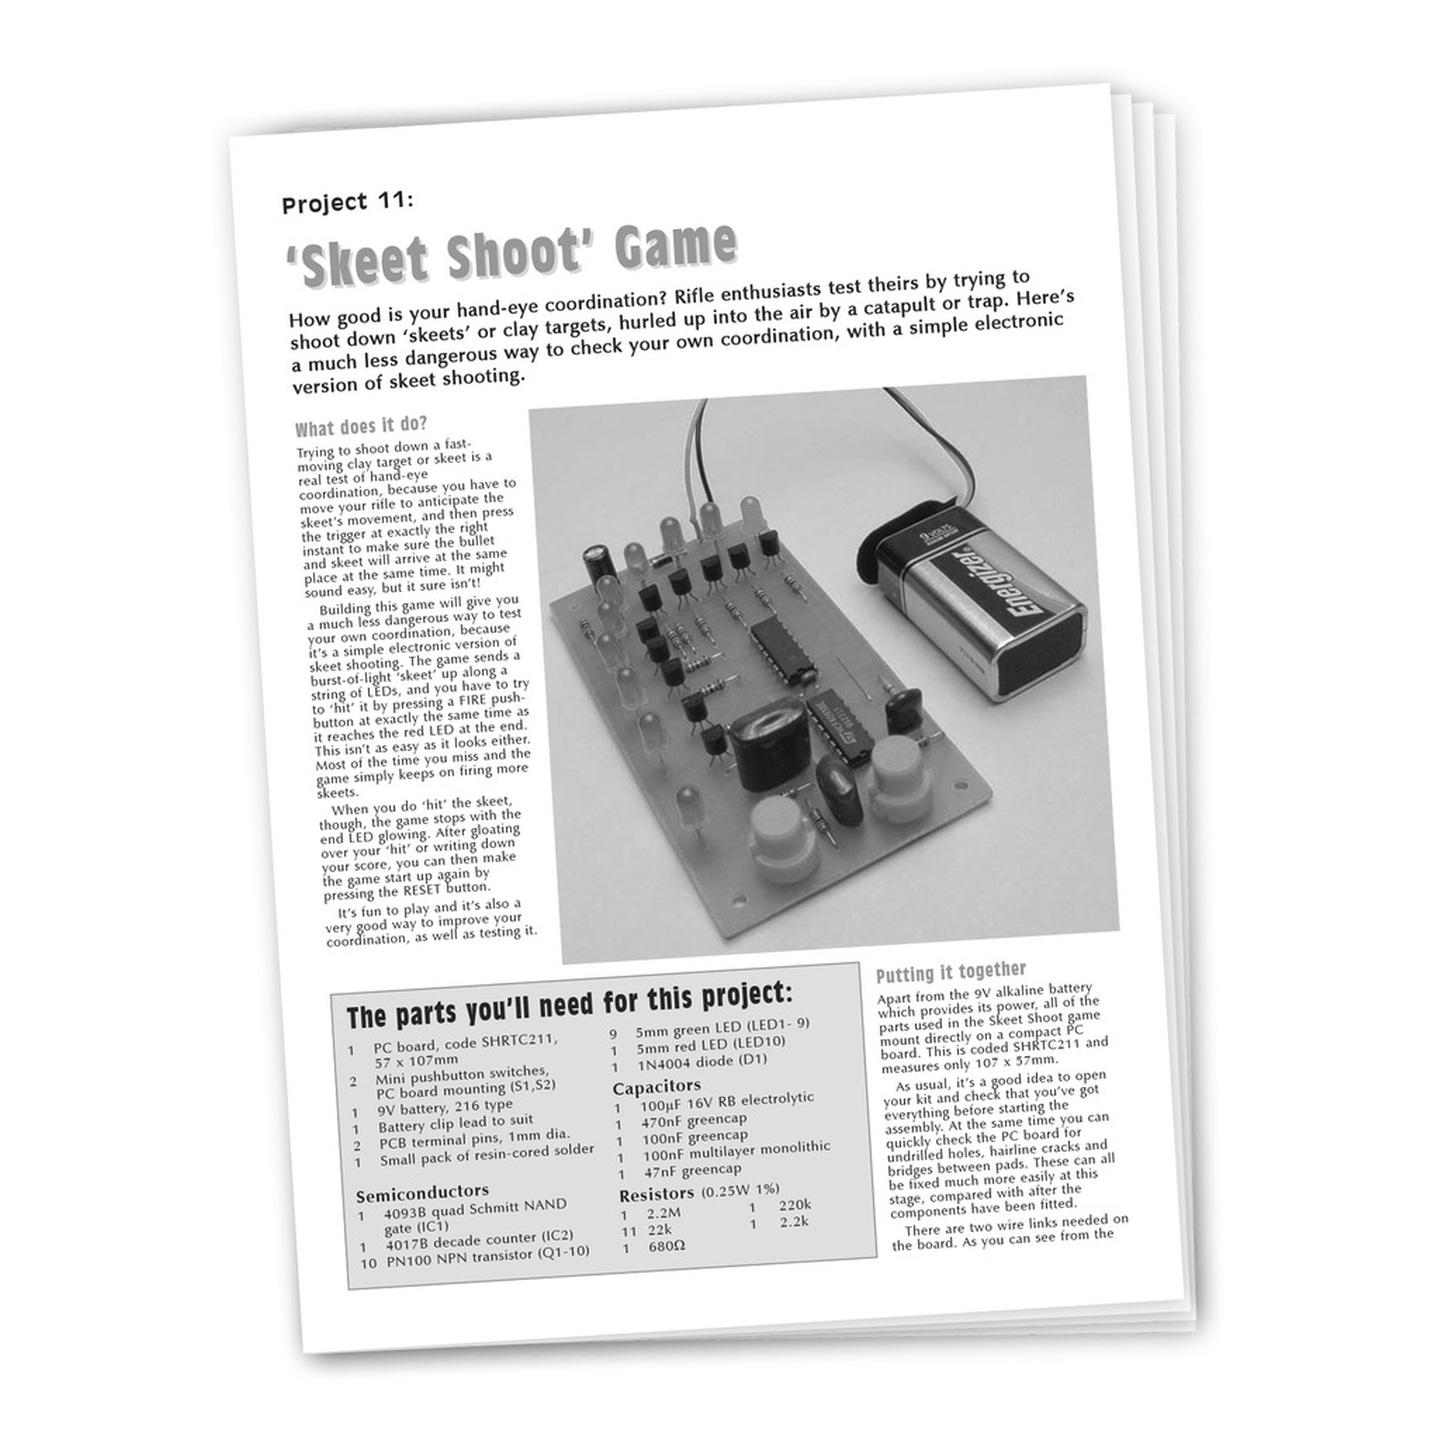 Instructions to suit SC2 Project - KJ8220 Skeet shooting game